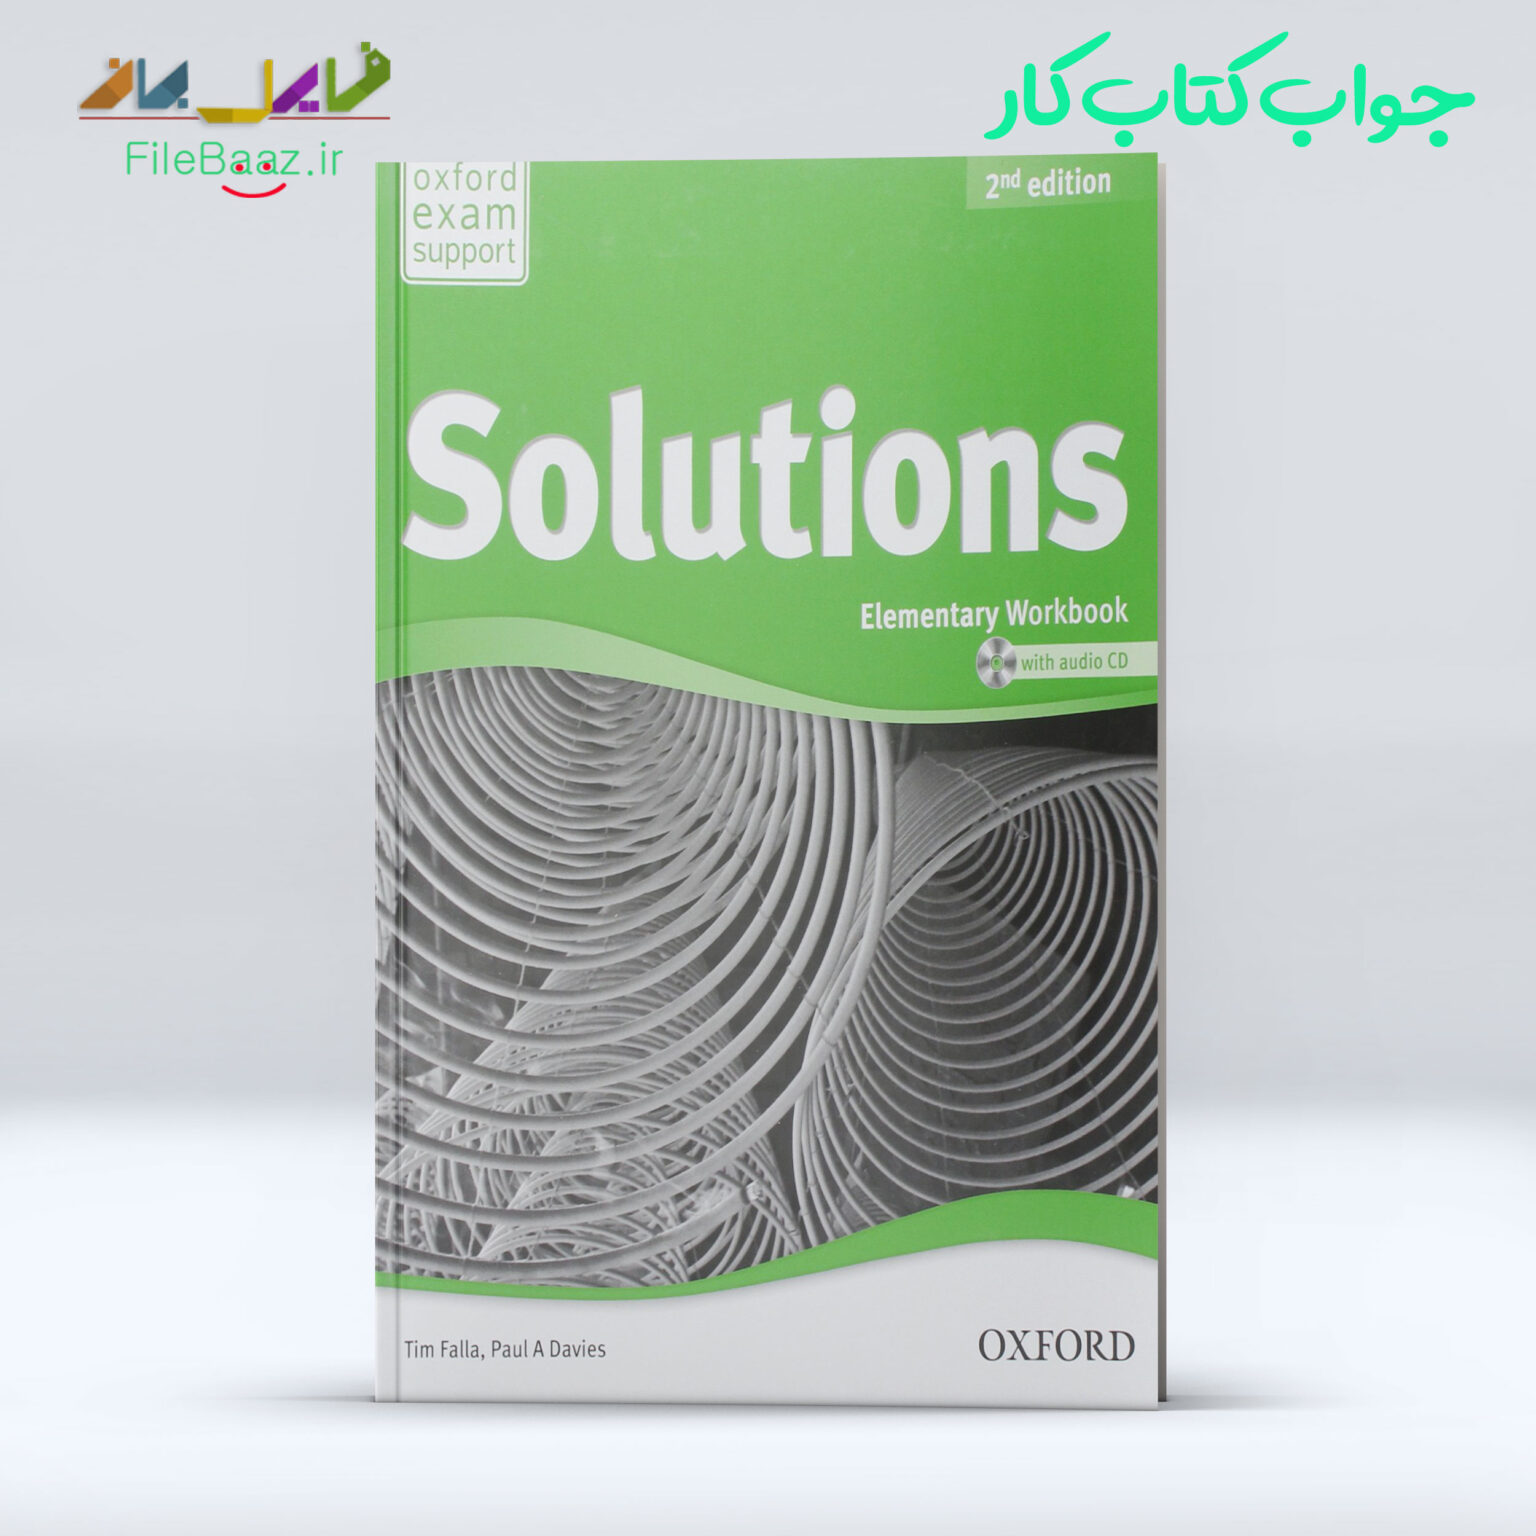 Third Edition solutions Elementary Workbook. Solutions Elementary Workbook third Edition р 34 гдз. Solutions elementary 2